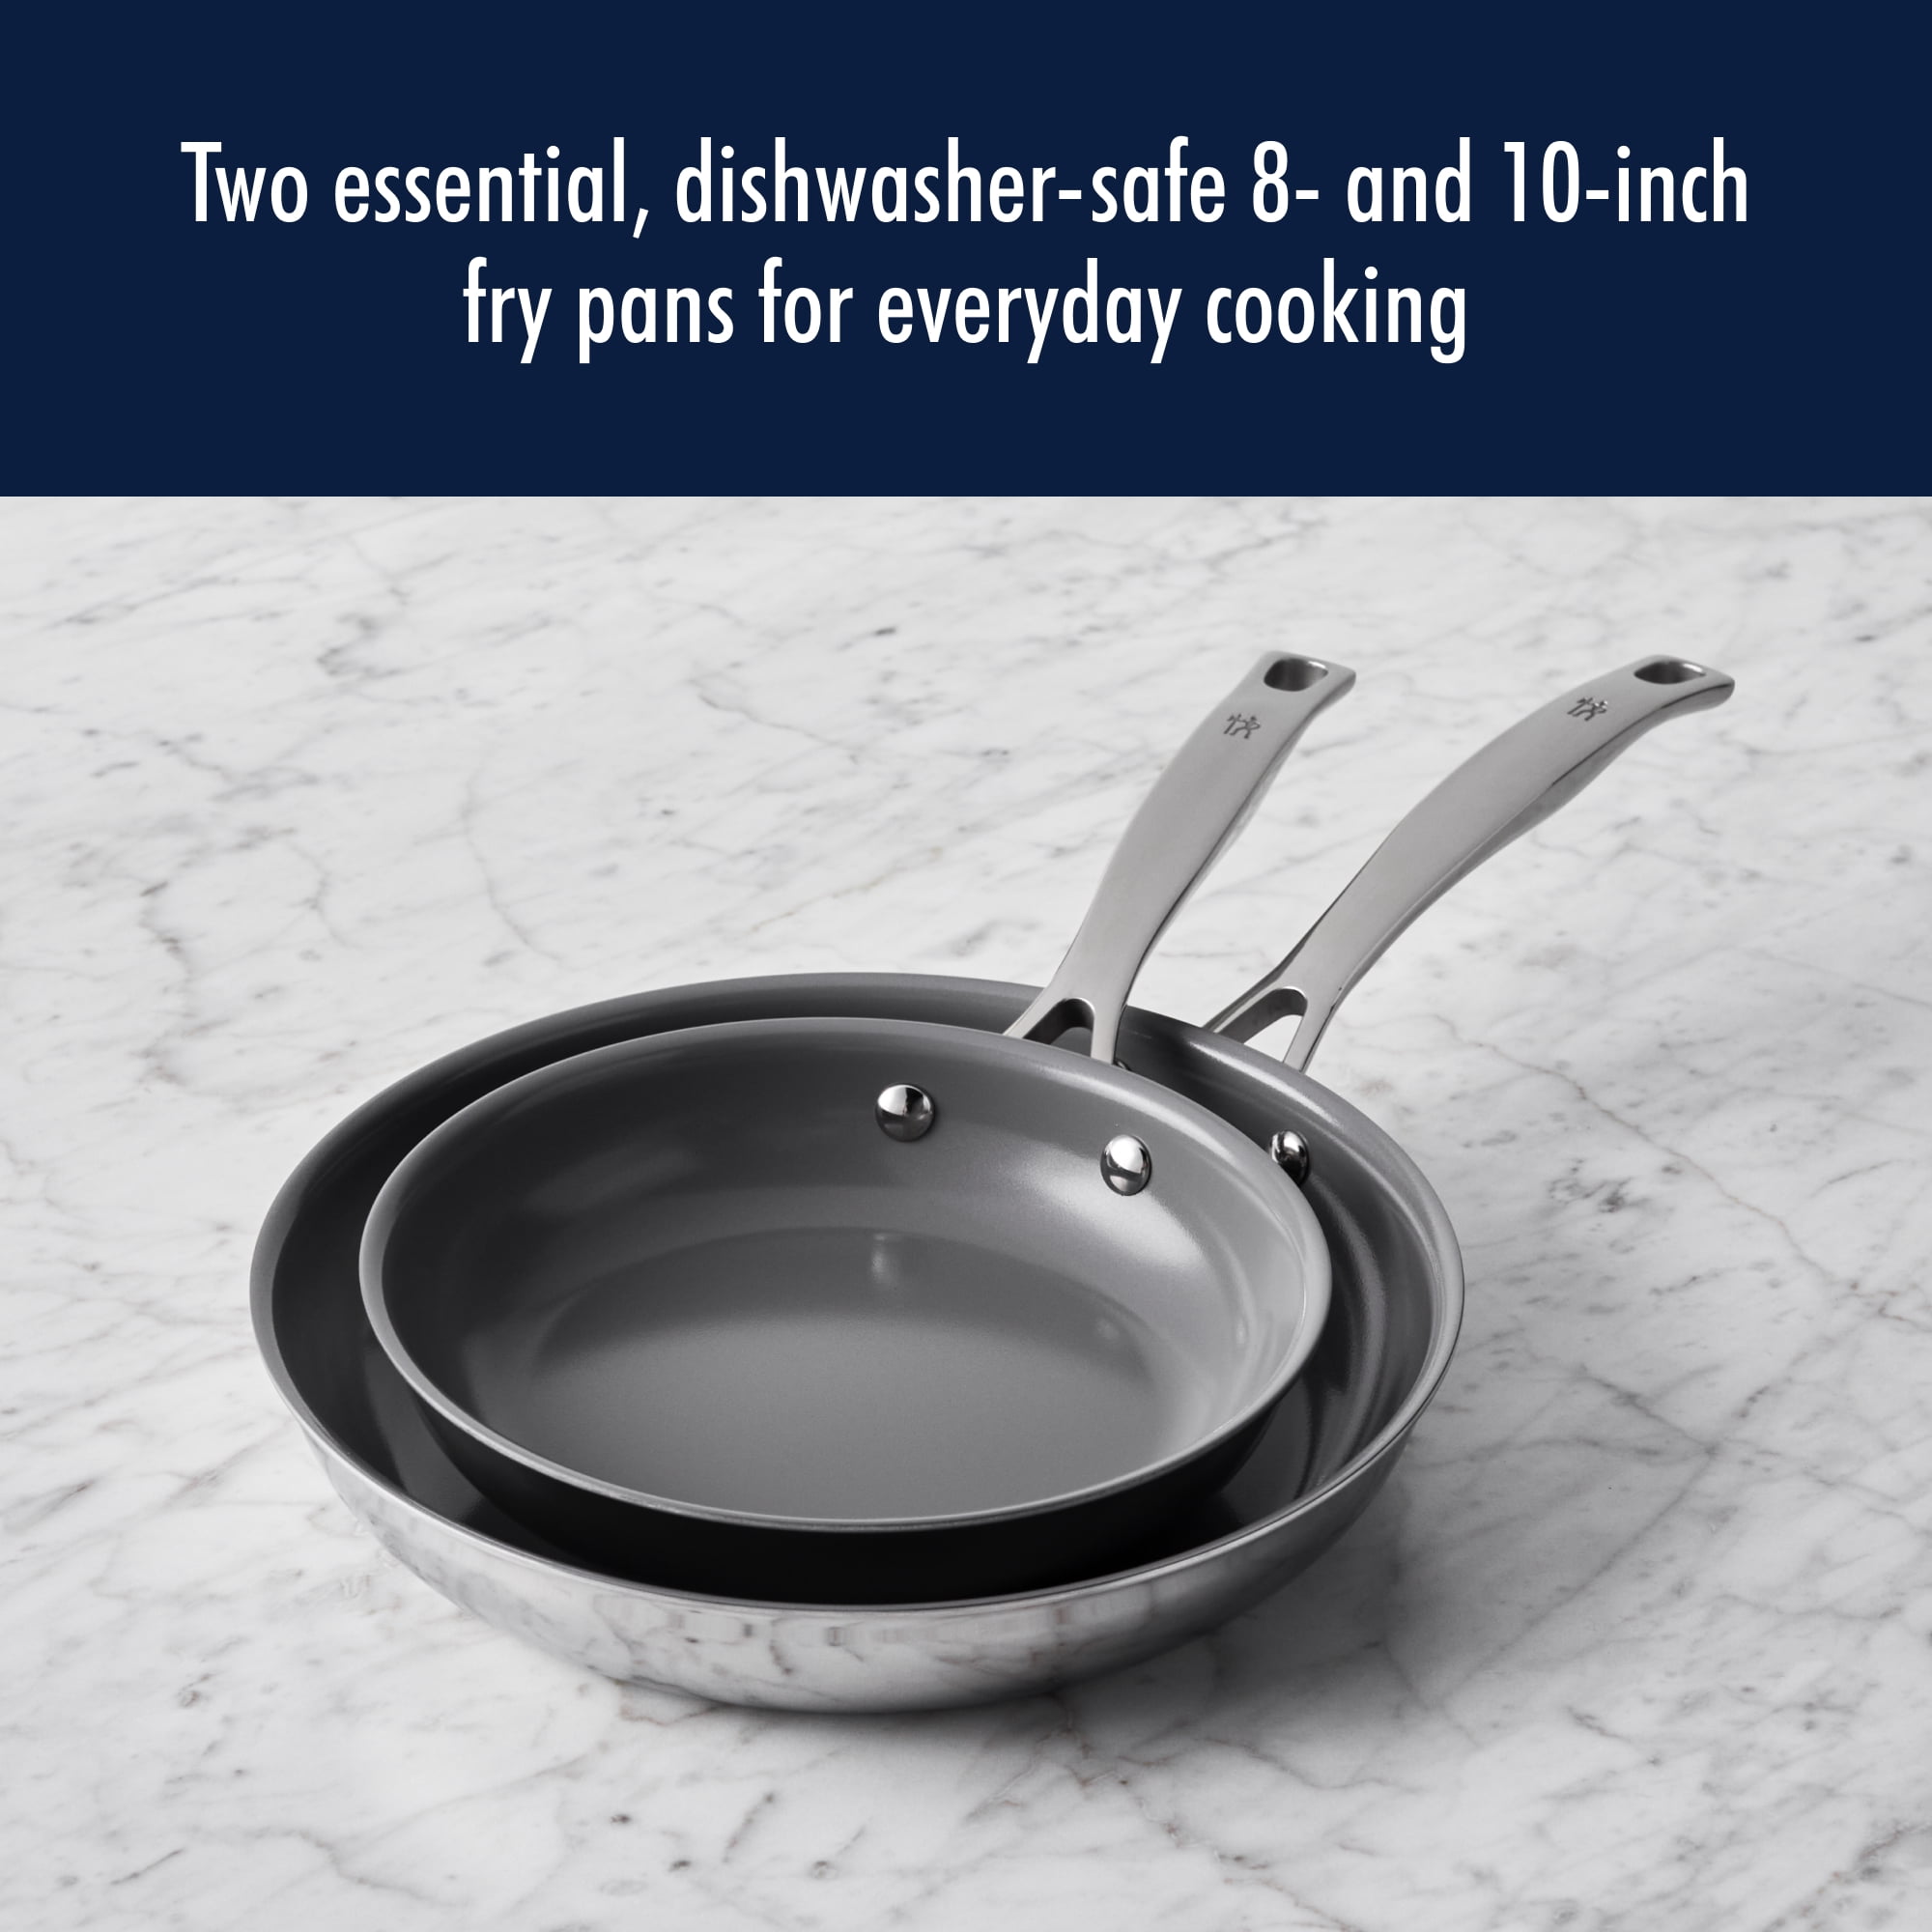 HENCKELS Clad Impulse 2-pc Nonstick Pan Set, Nonstick Frying Pan Set, 3-Ply  Clad Stainless Steel, Mirror Finish, Dishwasher Safe, Oven Safe, Induction